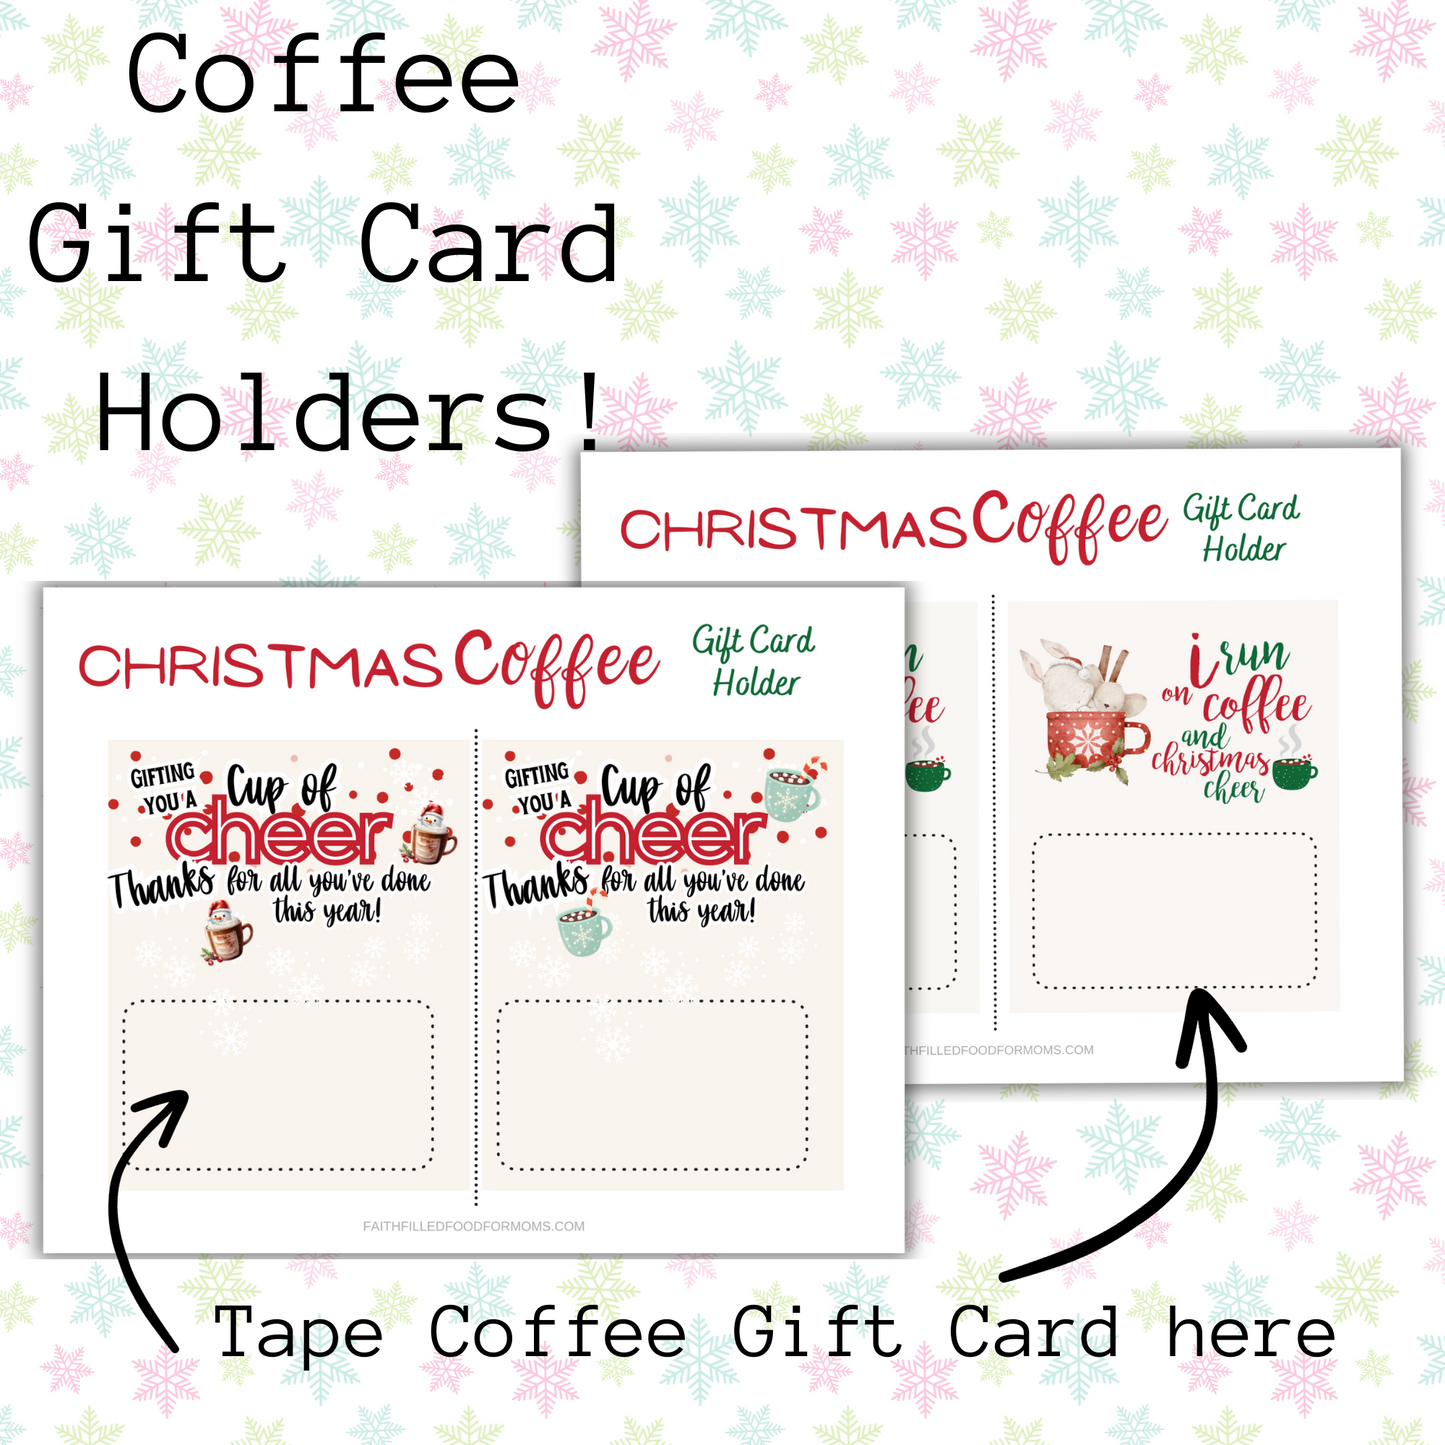 Cute Christmas Gift Card Holder for Coffee Lovers